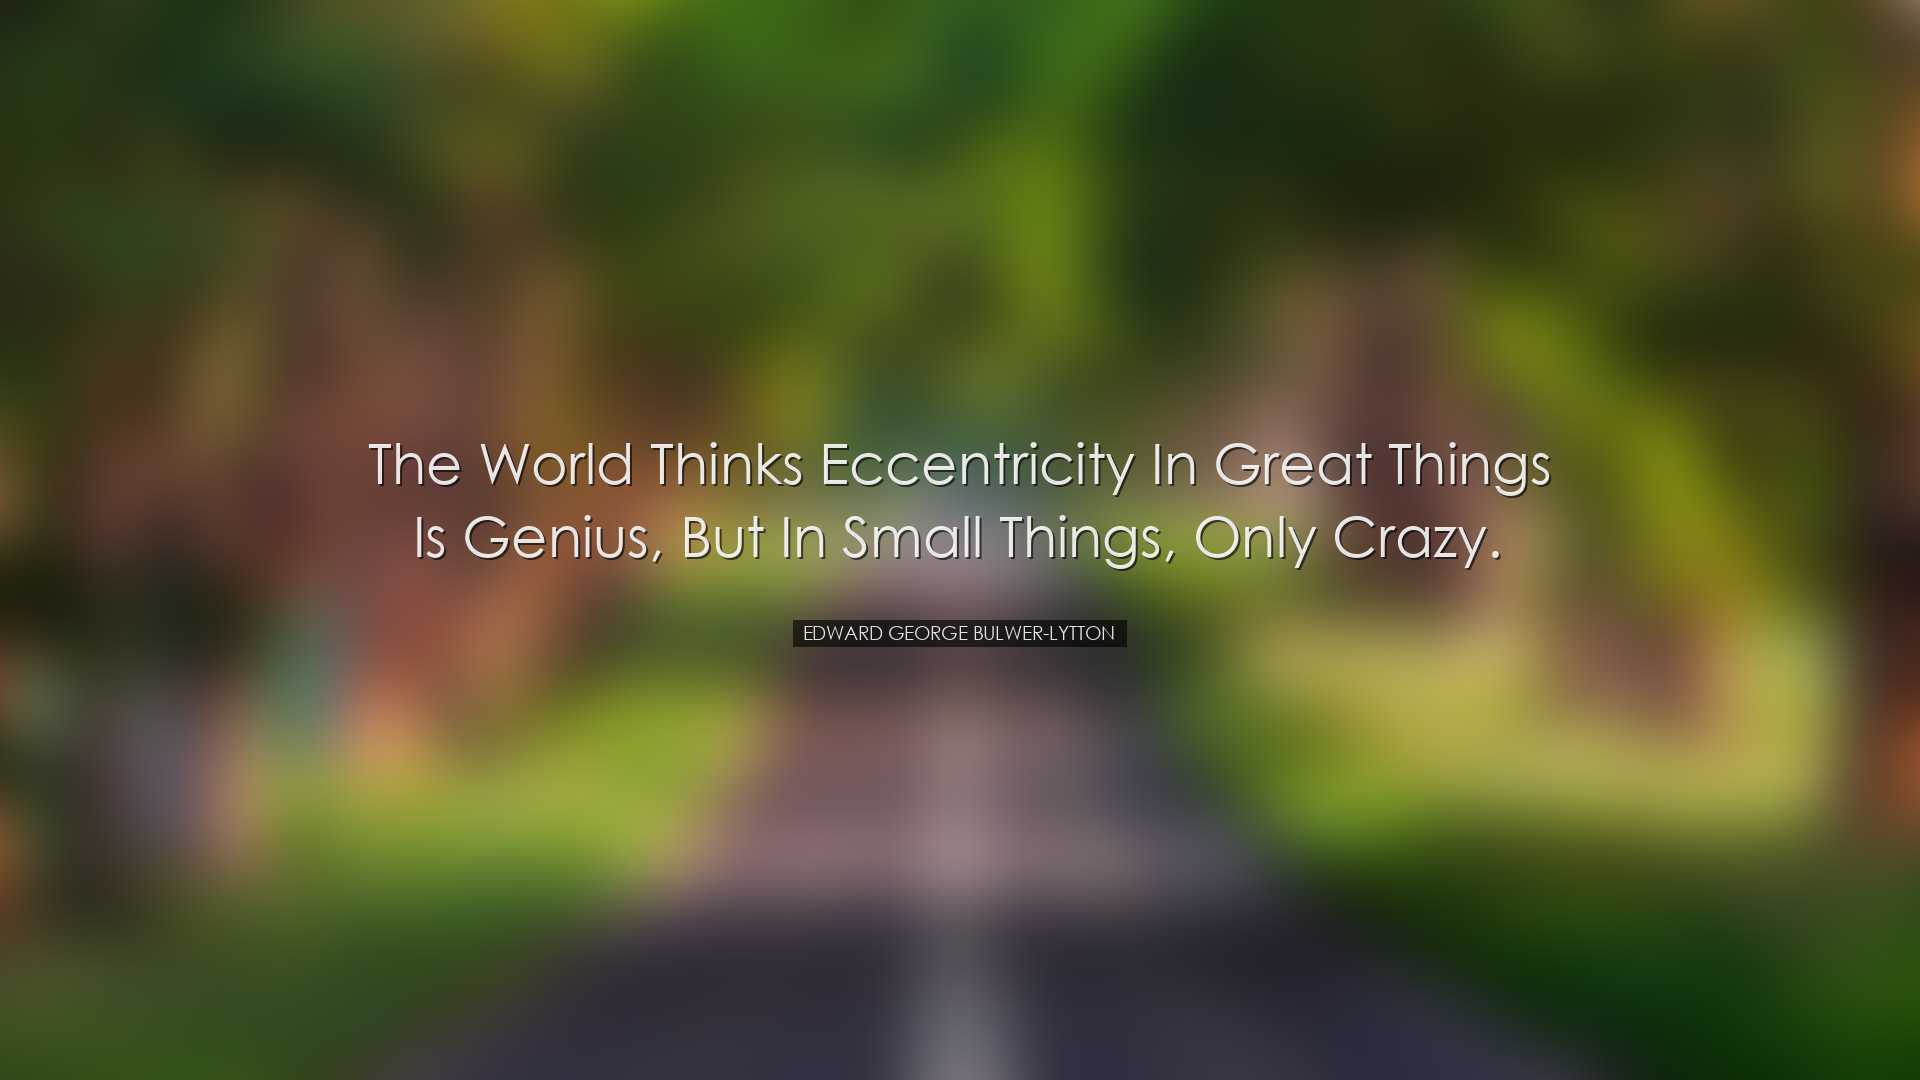 The world thinks eccentricity in great things is genius, but in sm